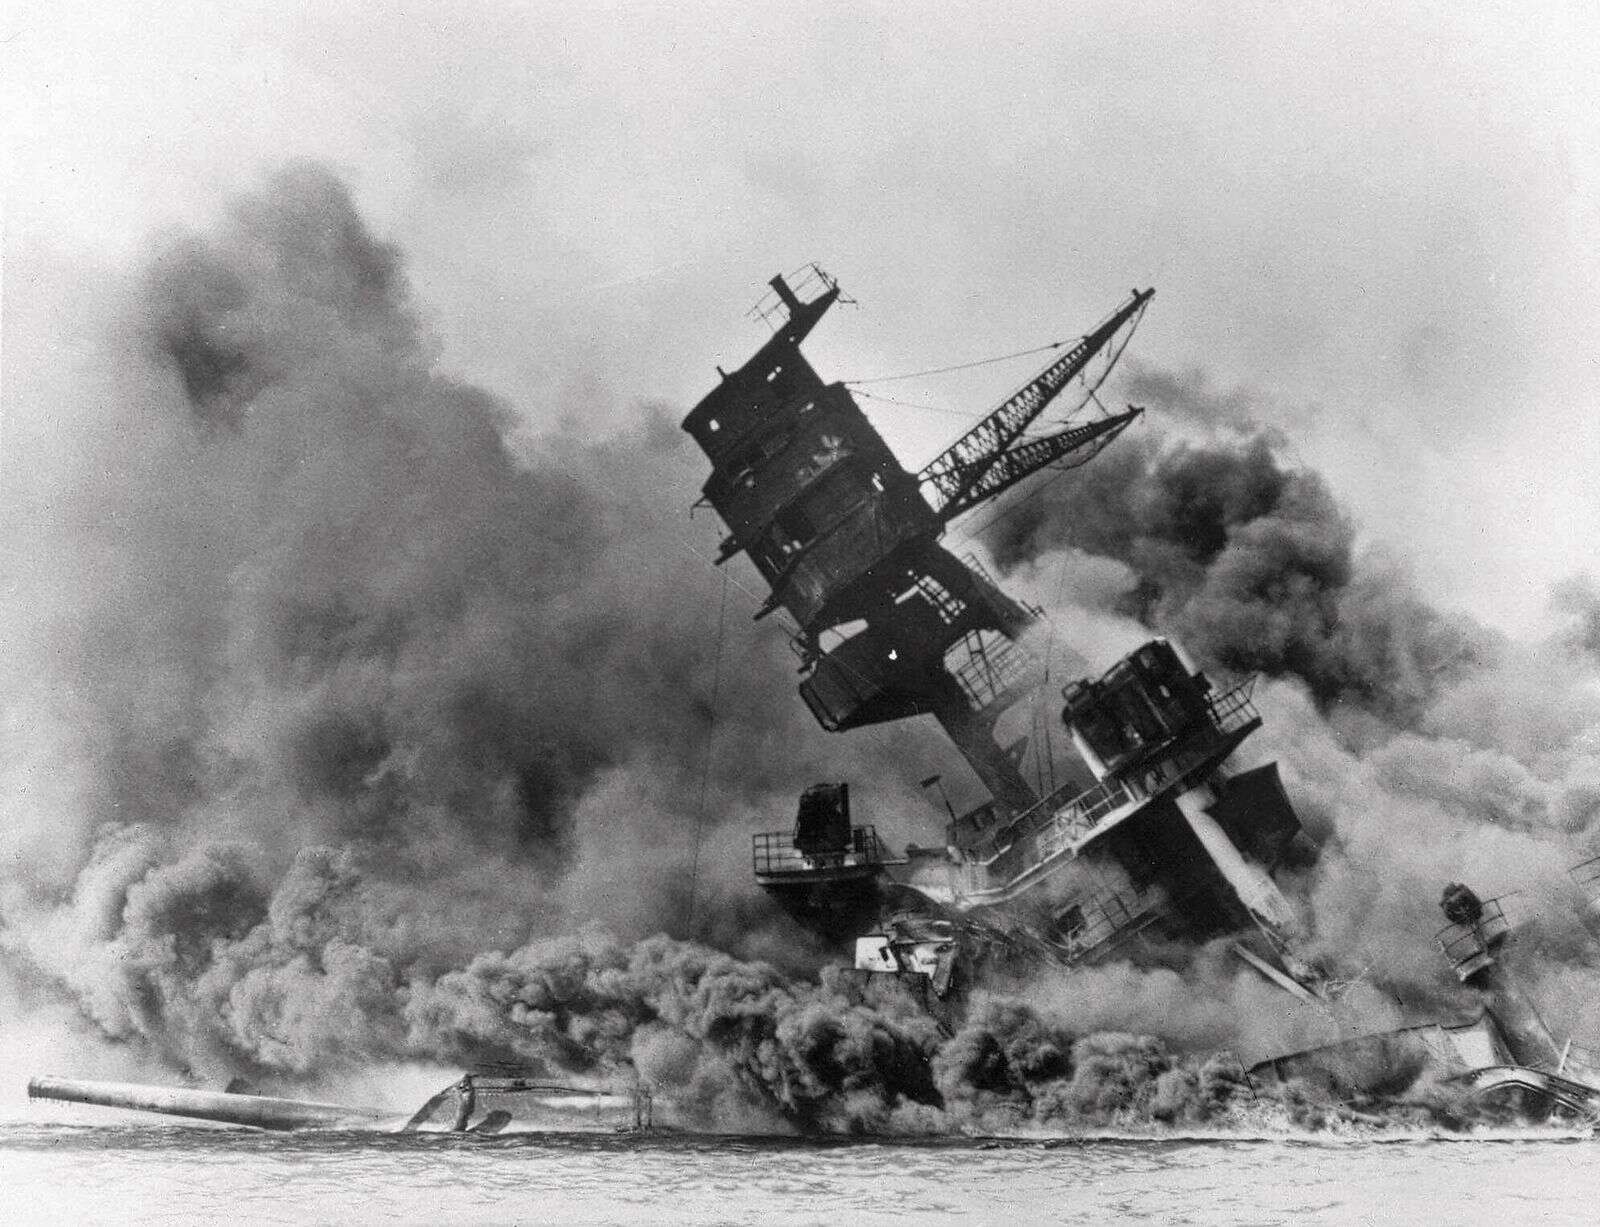 Smoke rises from the battleship USS Arizona as it sinks during the Japanese attack on Pearl Harbor